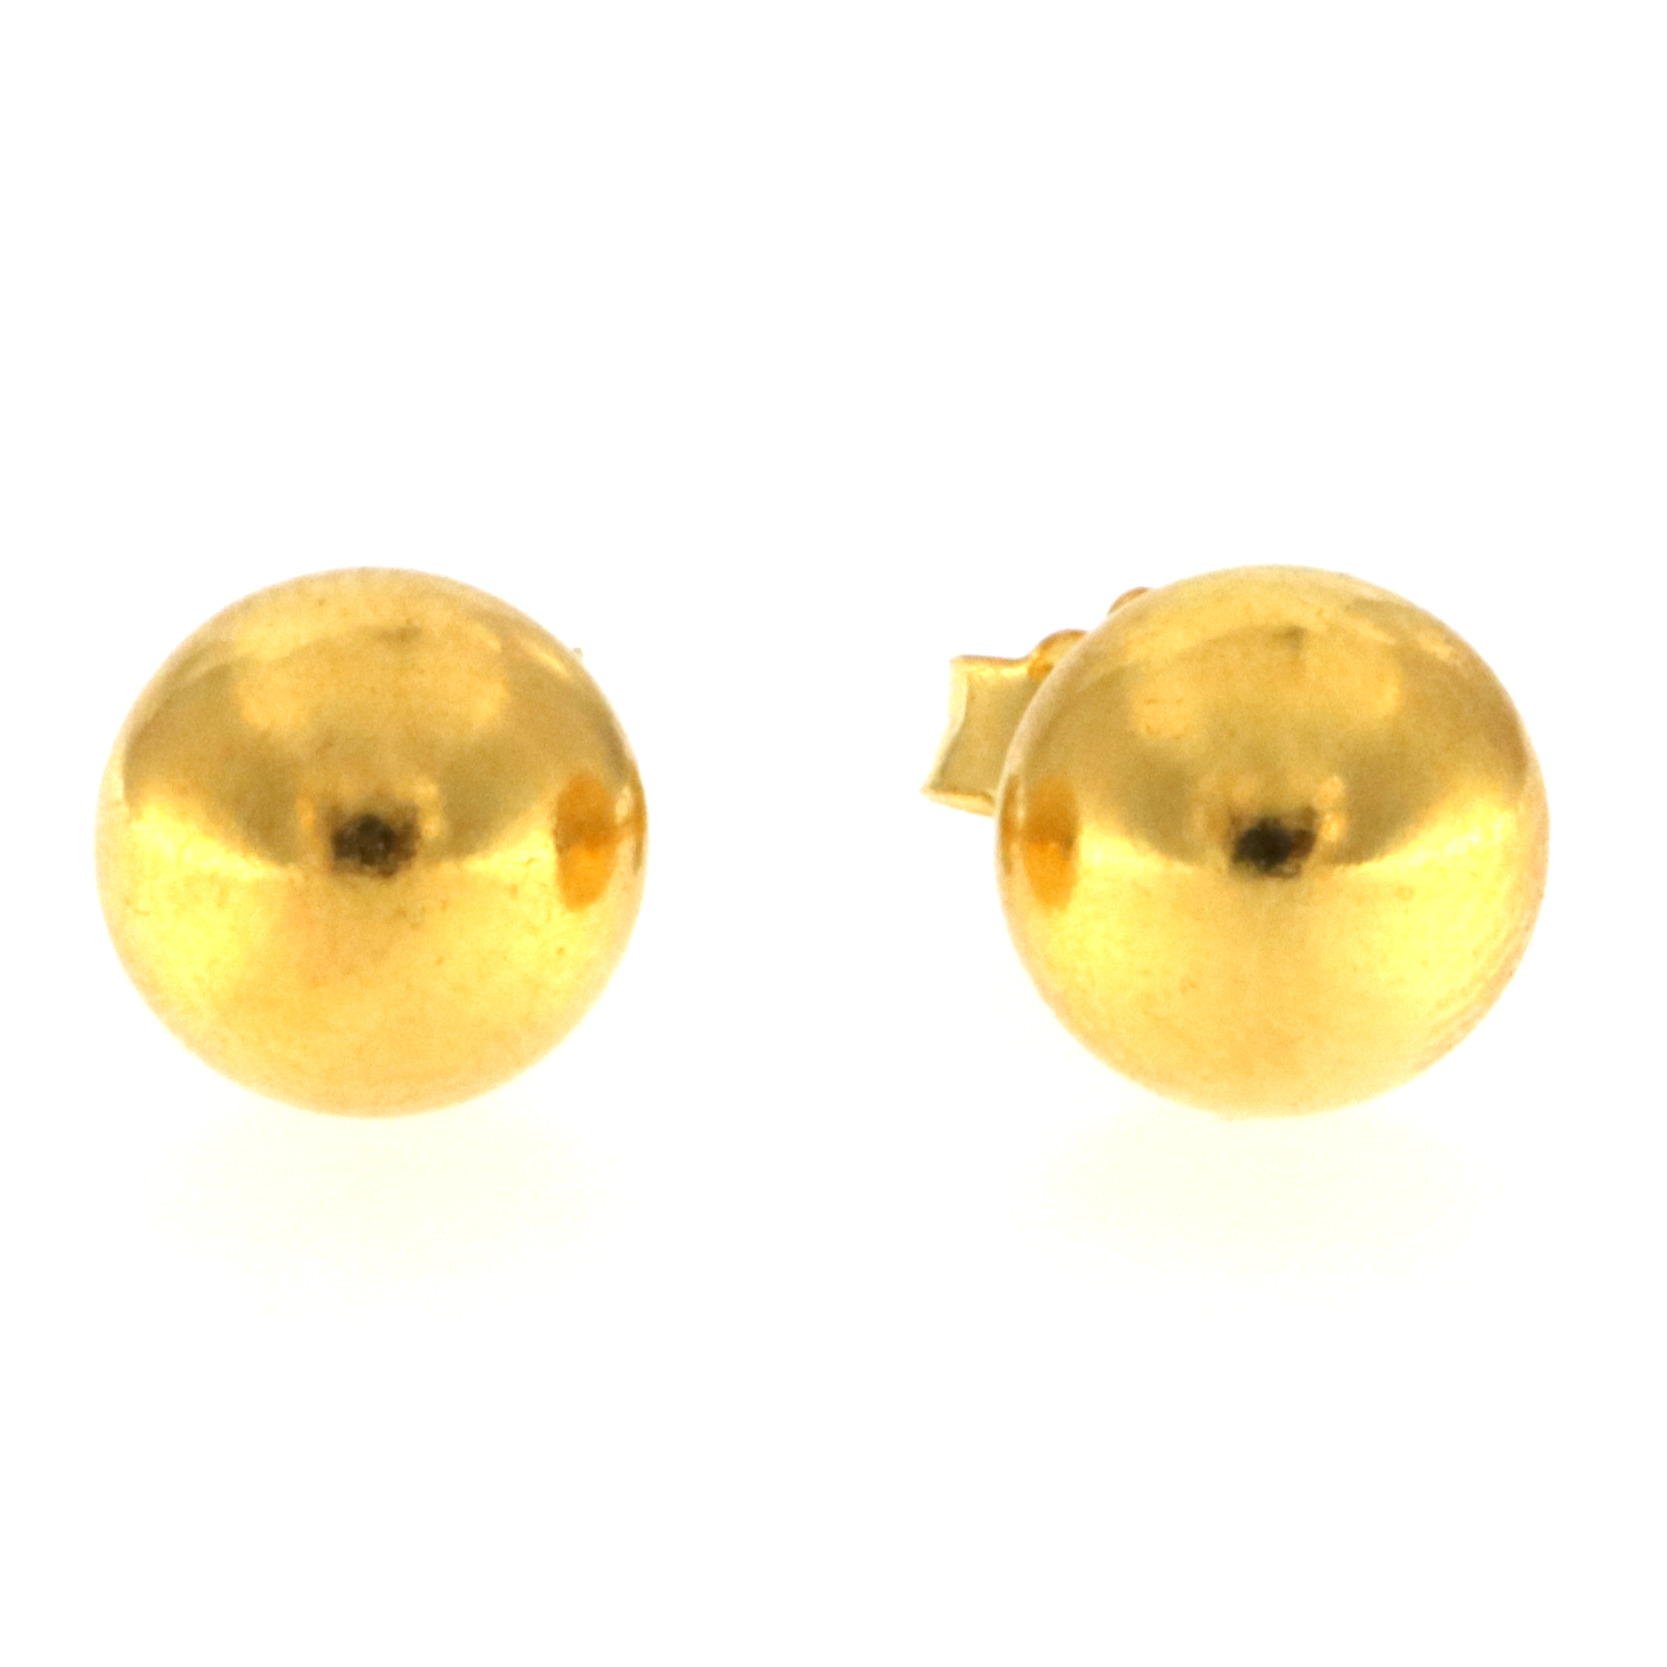 22ct Real Gold Asian/Indian/Pakistani Style Ball Stud Earrings